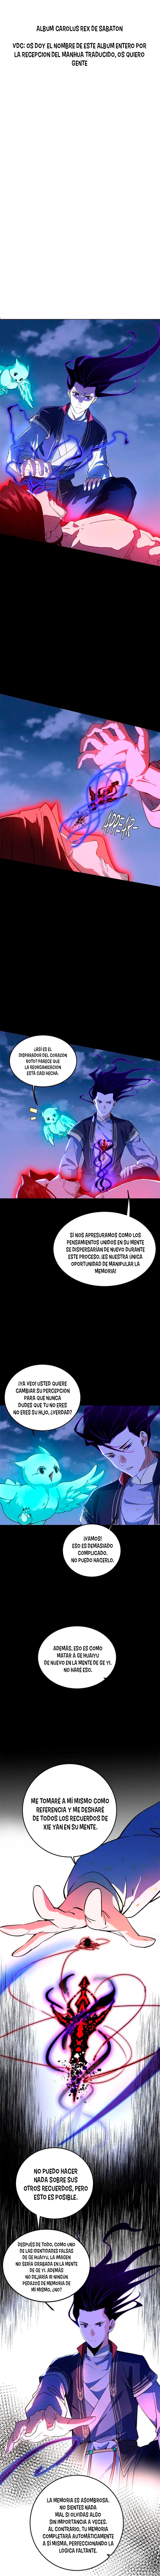 Manga Soy un dios maligno Chapter 312 image number 6